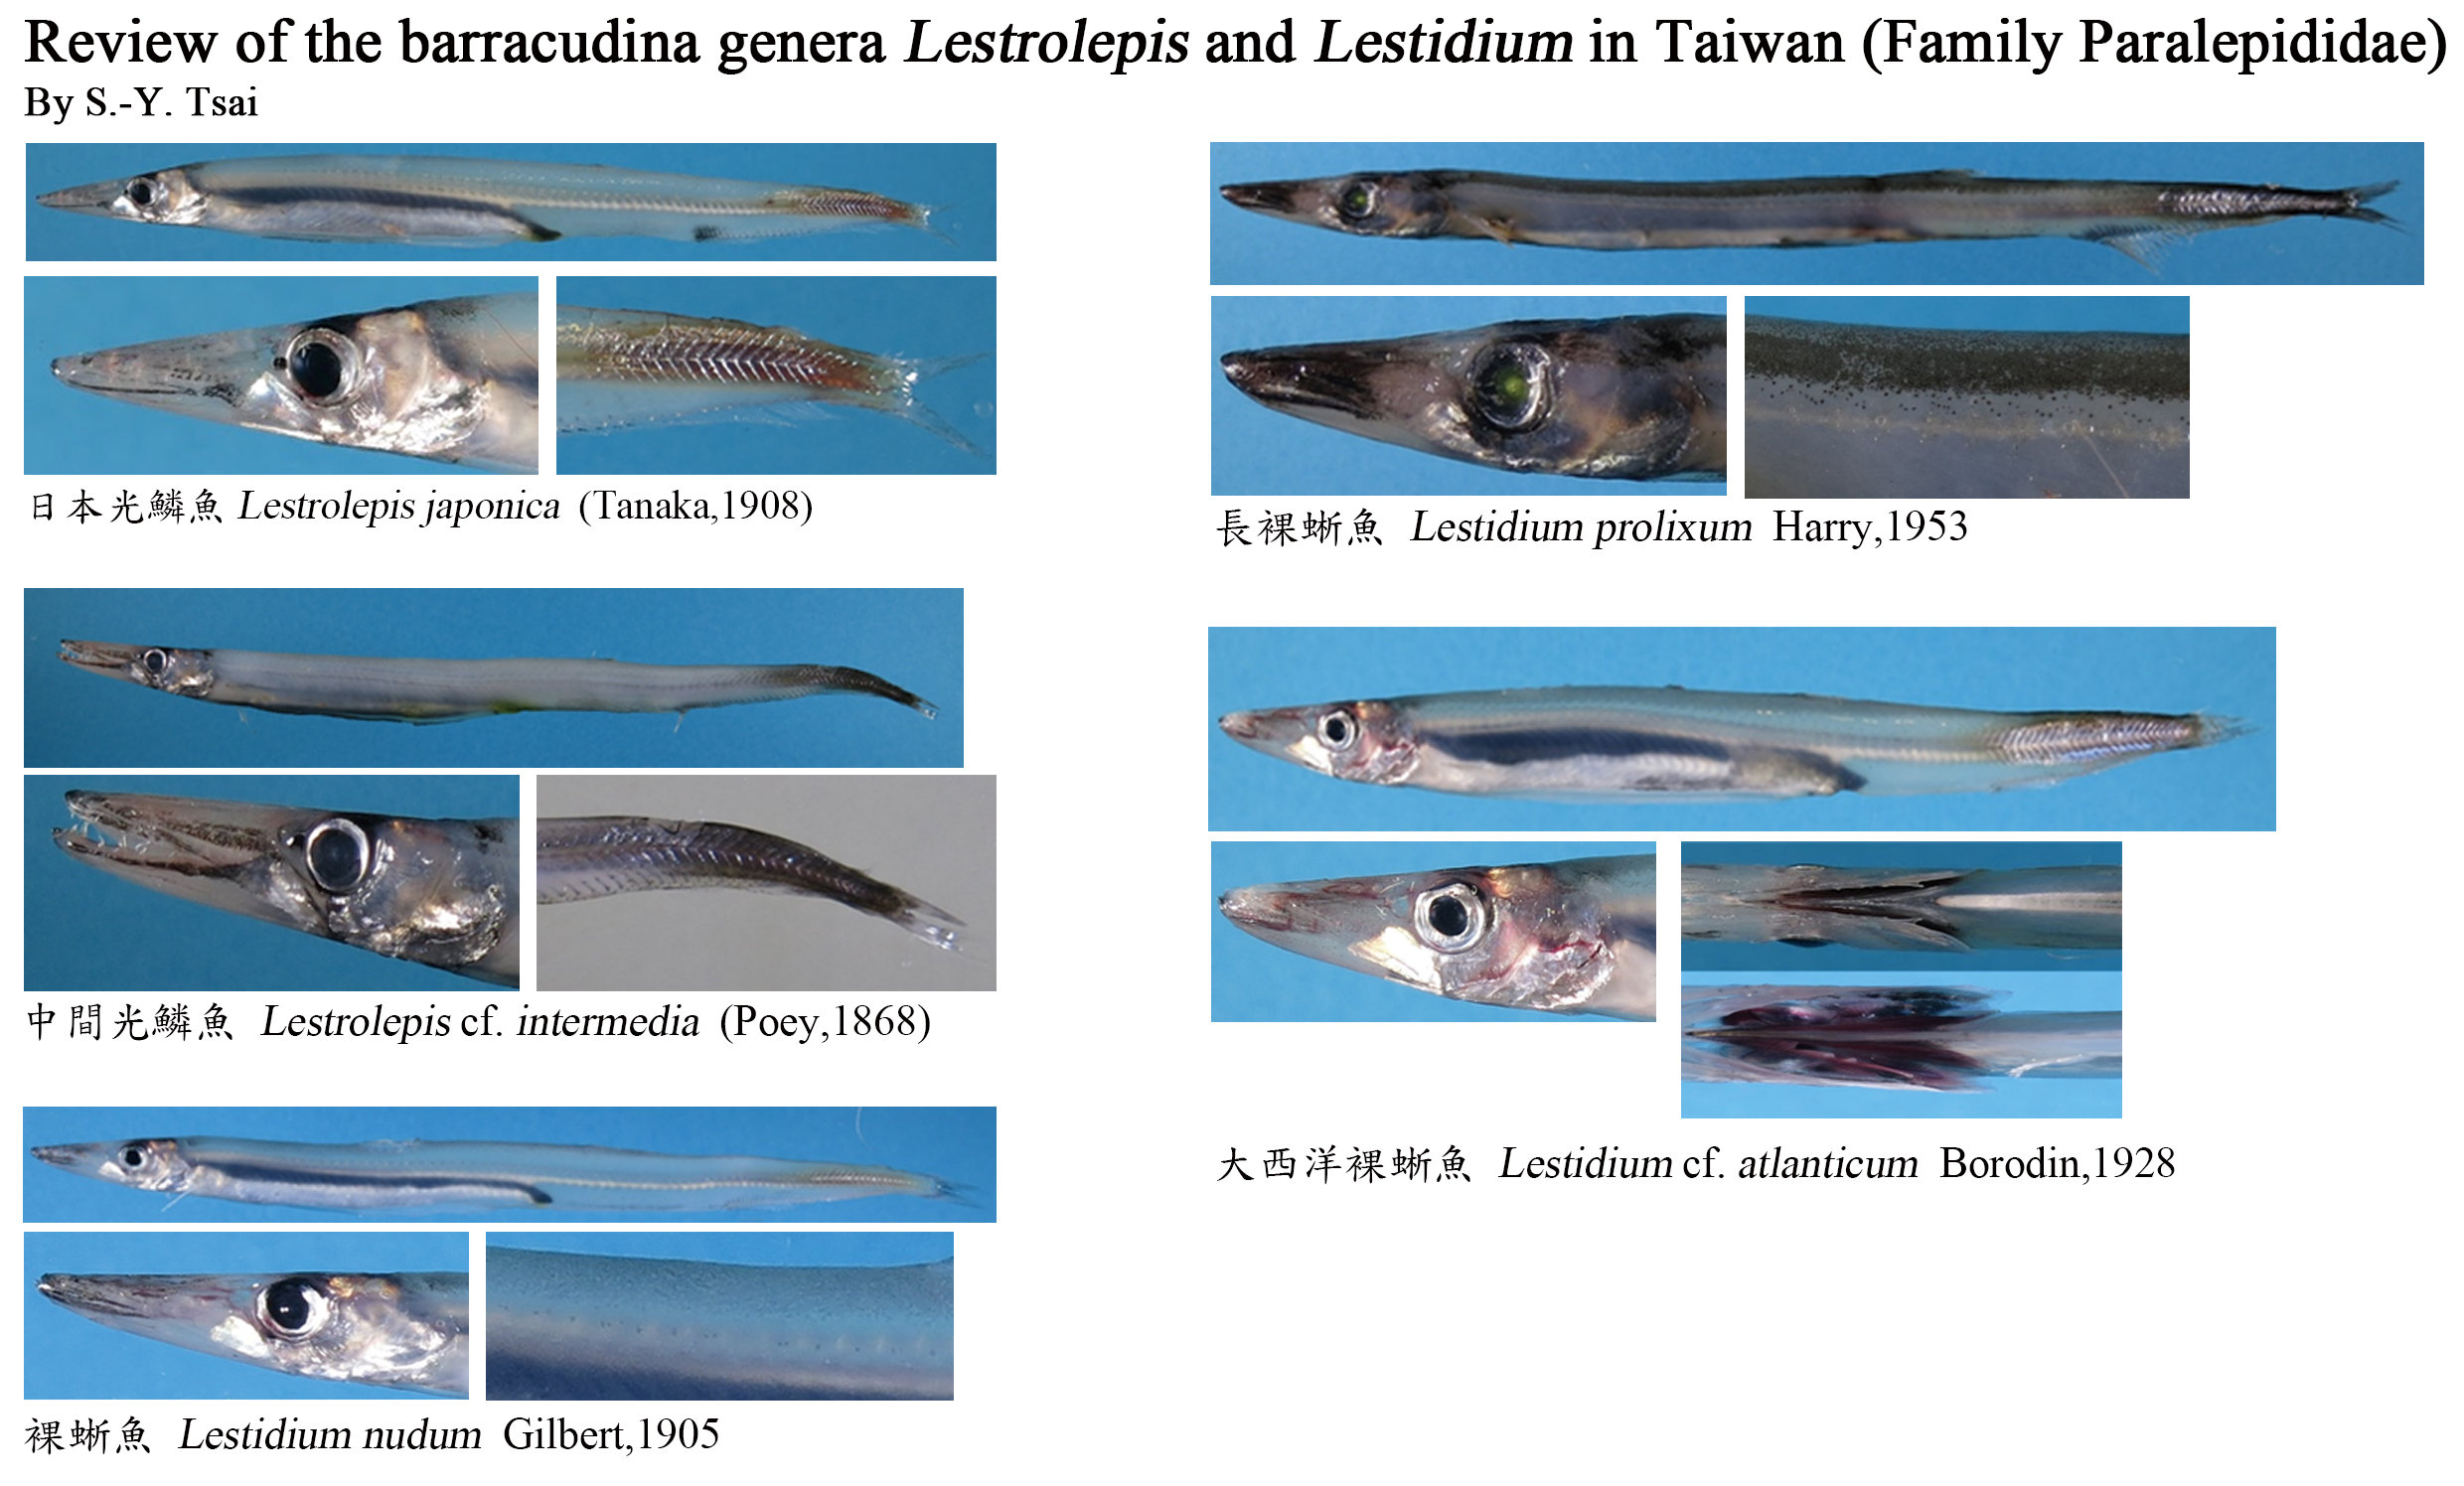 Review of the barracudina genera Lestrolepis and Lestidium in Taiwan